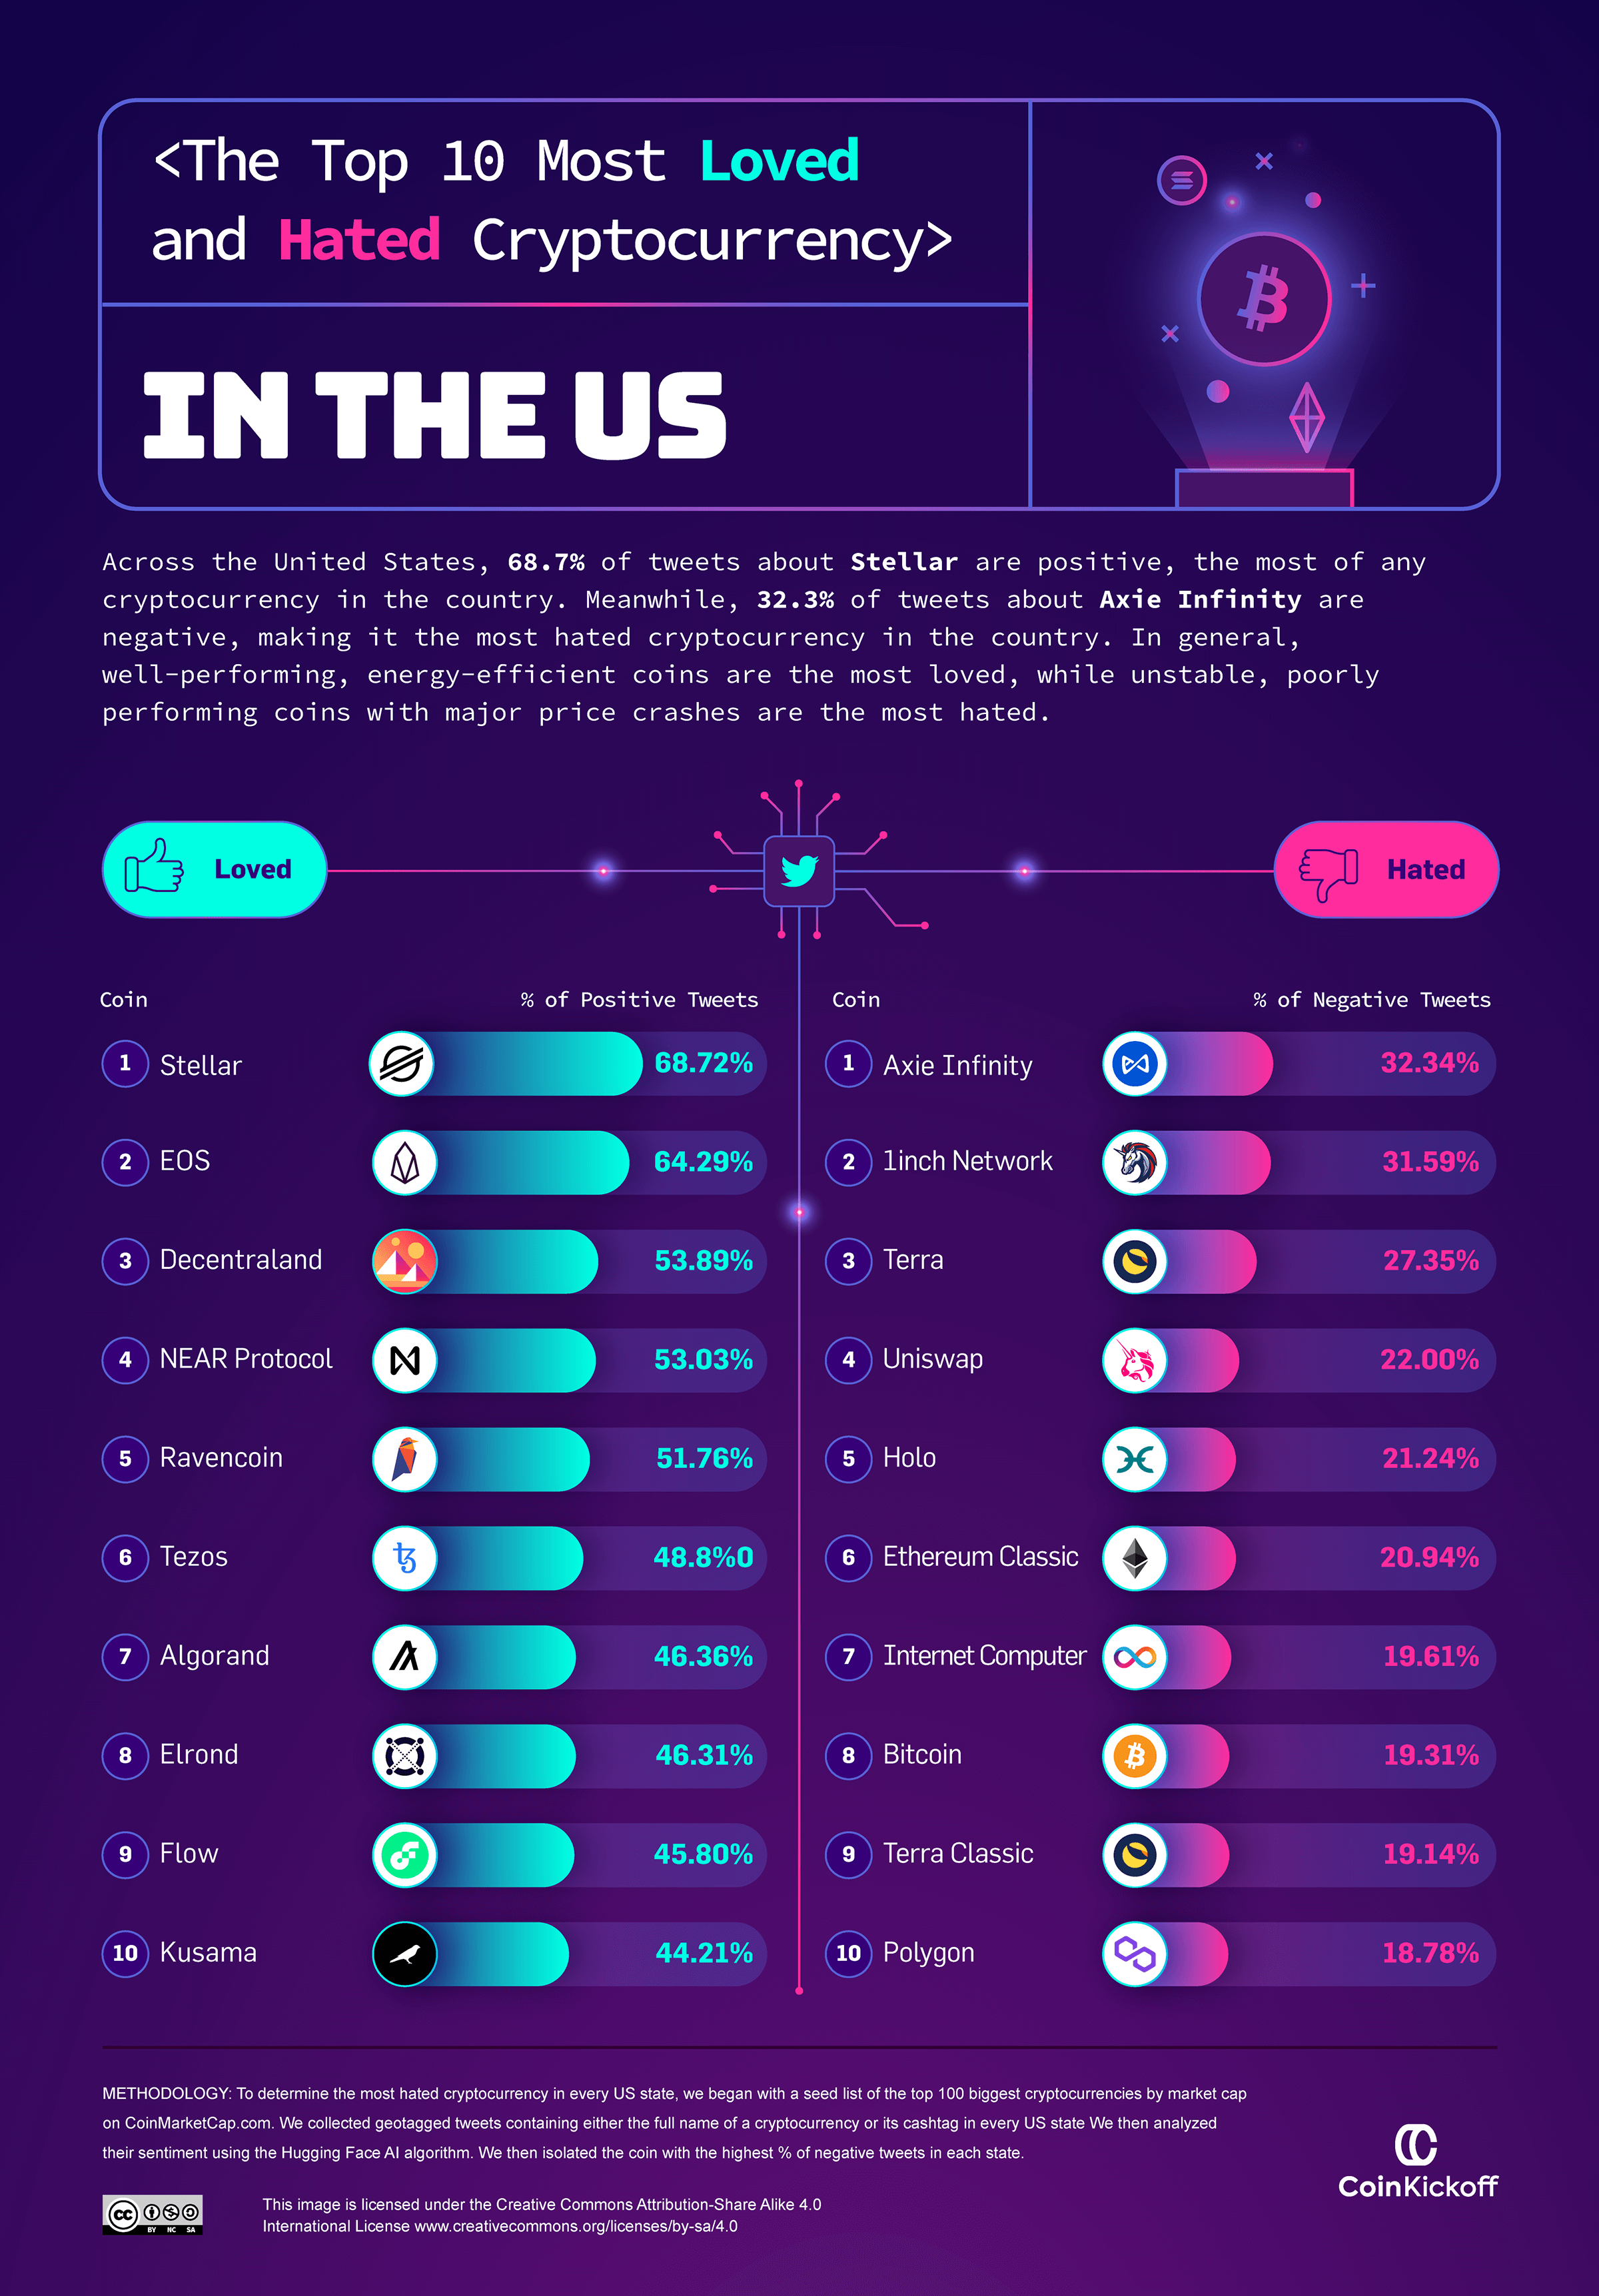 06 Top 10 Most Loved and Hated Cryptocurrency in the US Top 10 Most Loved and Hated Cryptocurrency in the US